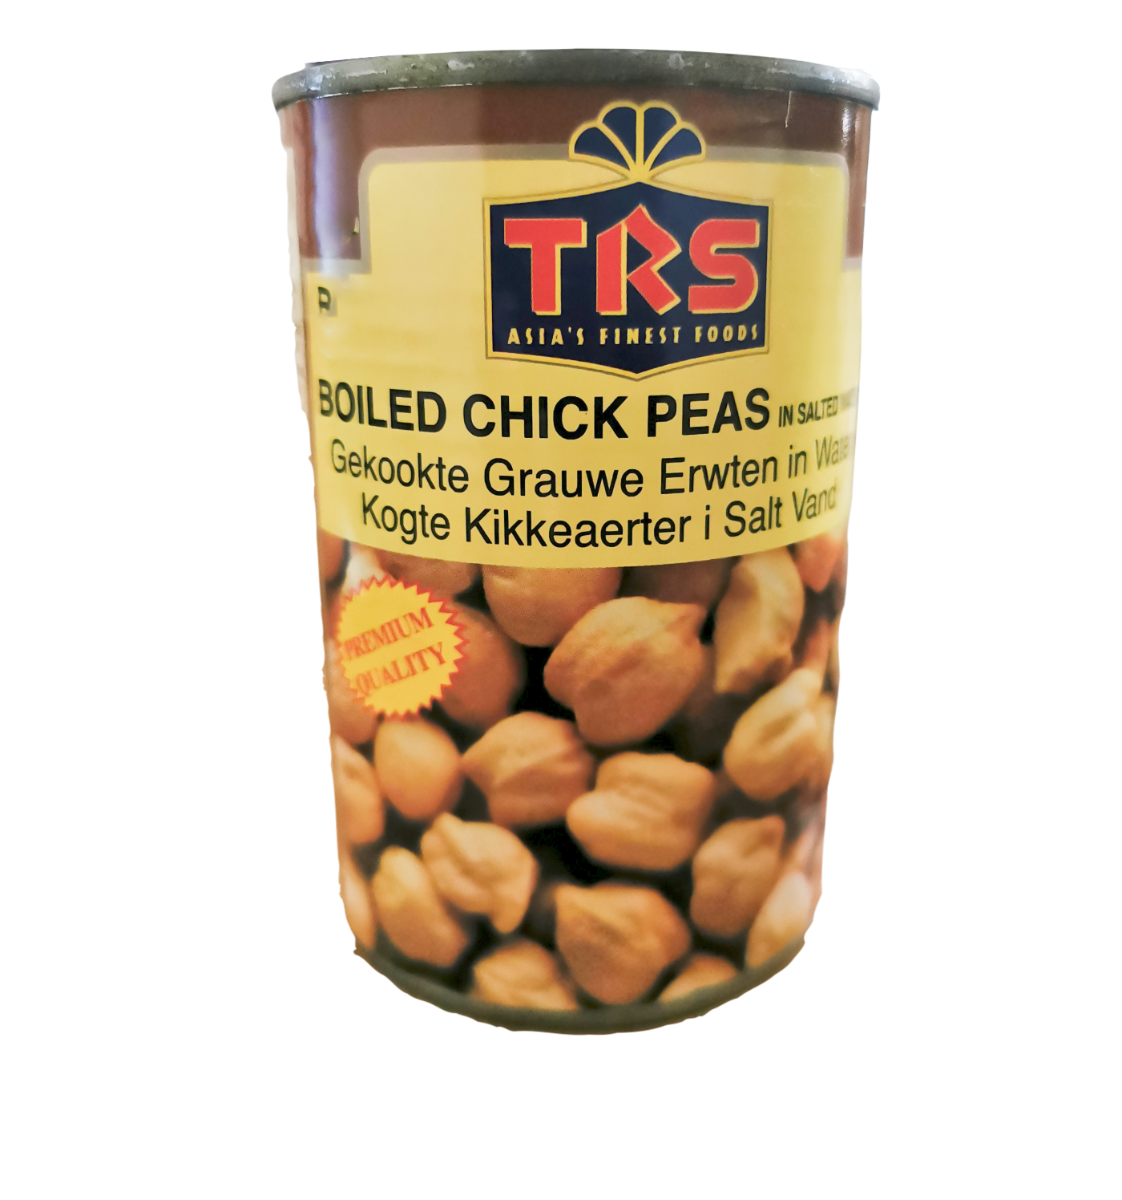 TRS Boiled Chick Peas in Salted Water